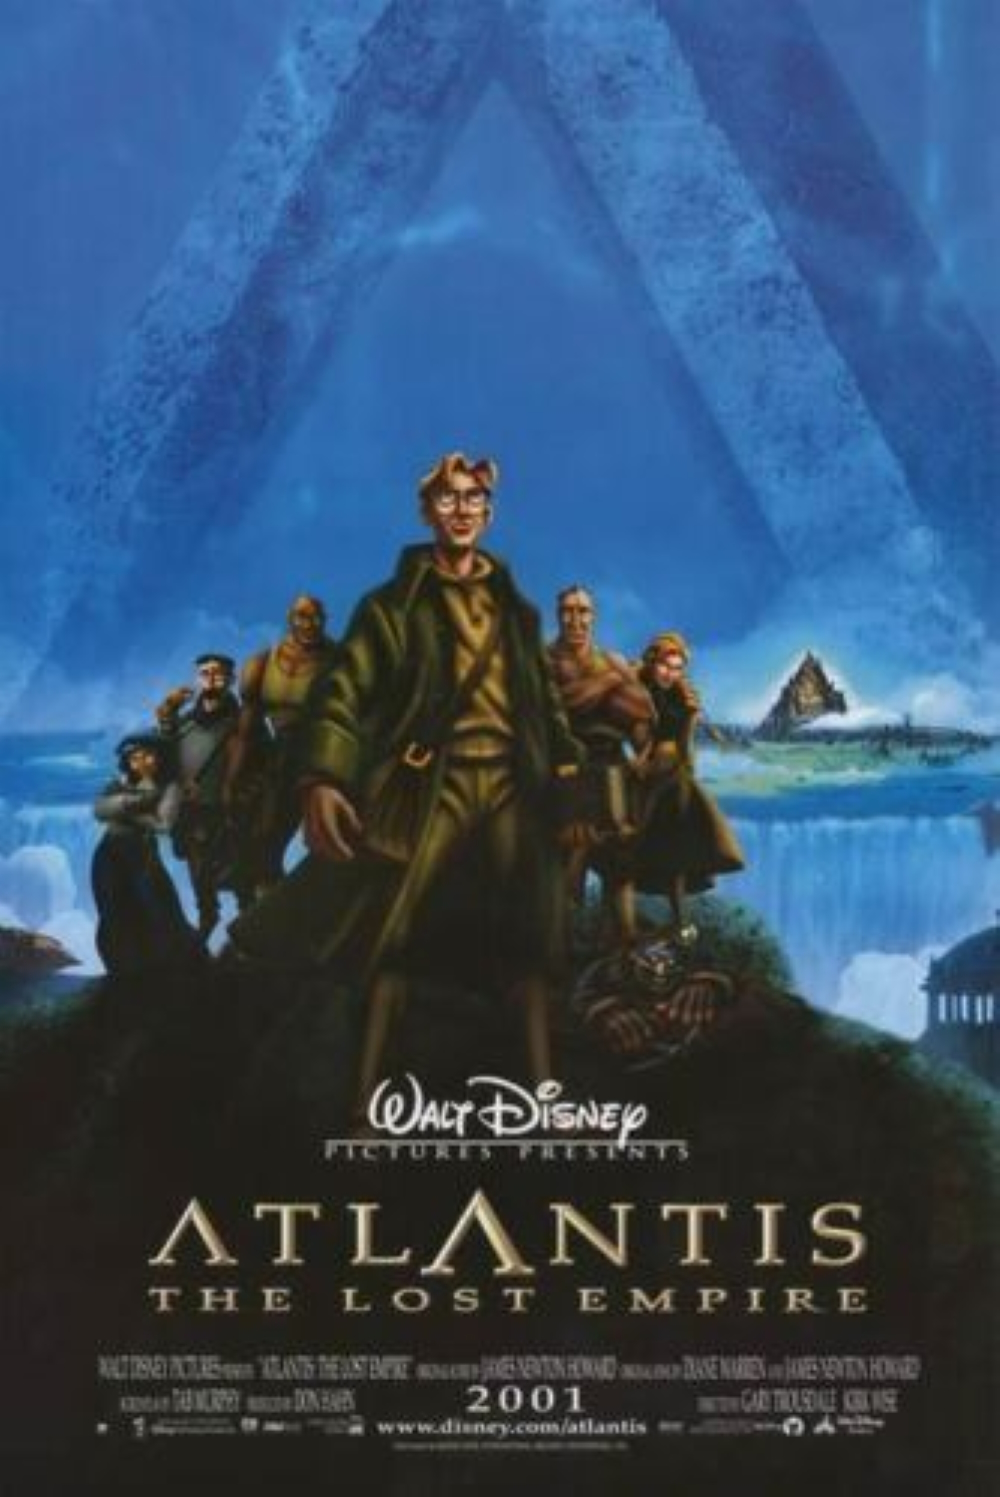 'Atlantis: The lost Empire' (2001): Gary Trousdale's position - director/story